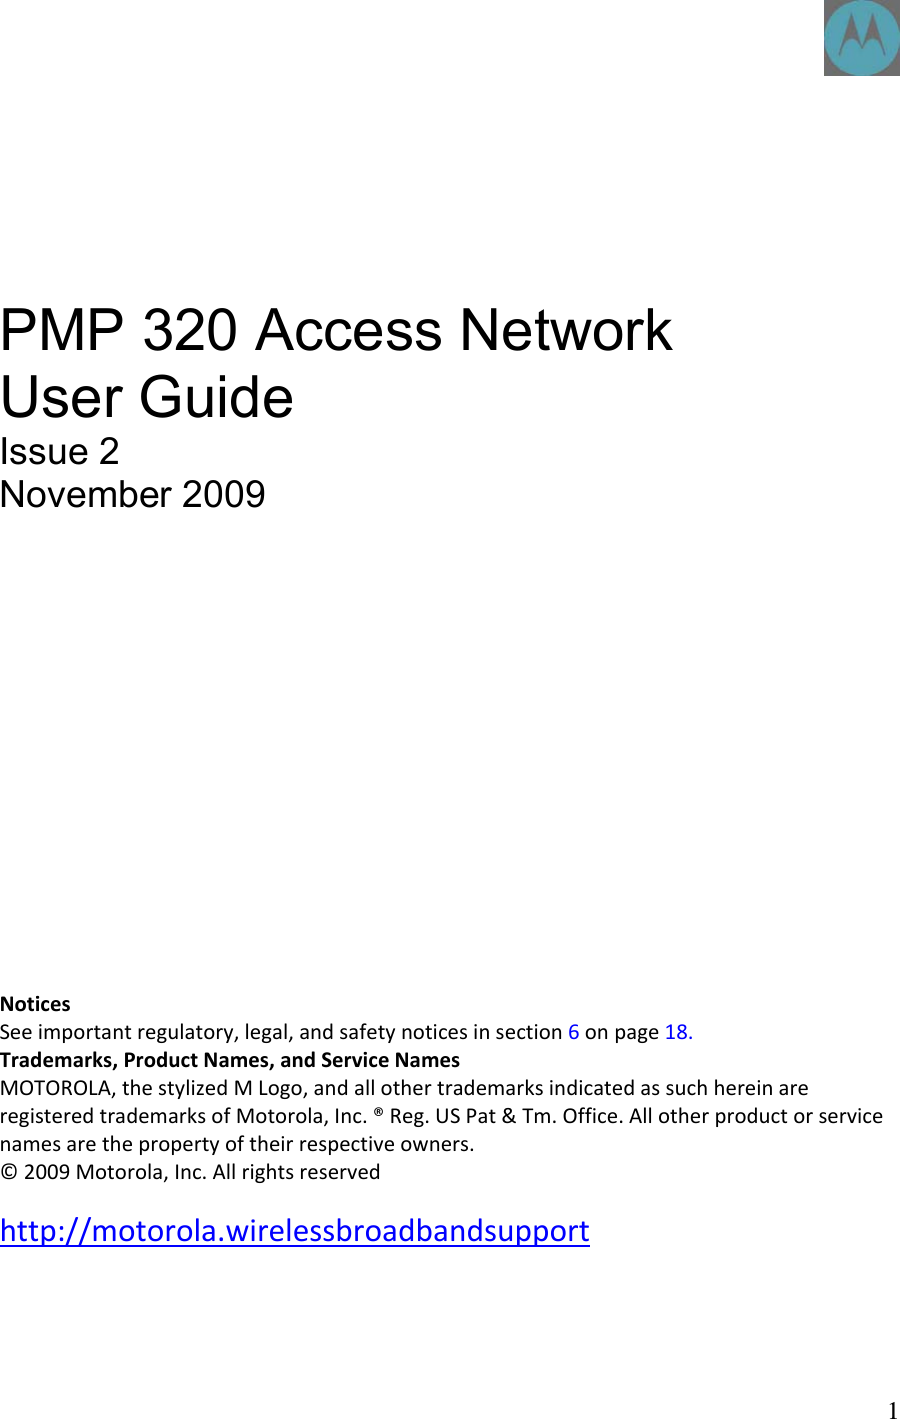       PMP 320 Access Network User Guide Issue 2 November 2009            NoticesSeeimportantregulatory,legal,andsafetynoticesinsection6onpage18.Trademarks,ProductNames,andServiceNamesMOTOROLA,thestylizedMLogo,andallothertrademarksindicatedassuchhereinareregisteredtrademarksofMotorola,Inc.®Reg.USPat&amp;Tm.Office.Allotherproductorservicenamesarethepropertyoftheirrespectiveowners.©2009Motorola,Inc.Allrightsreserved http://motorola.wirelessbroadbandsupport    1